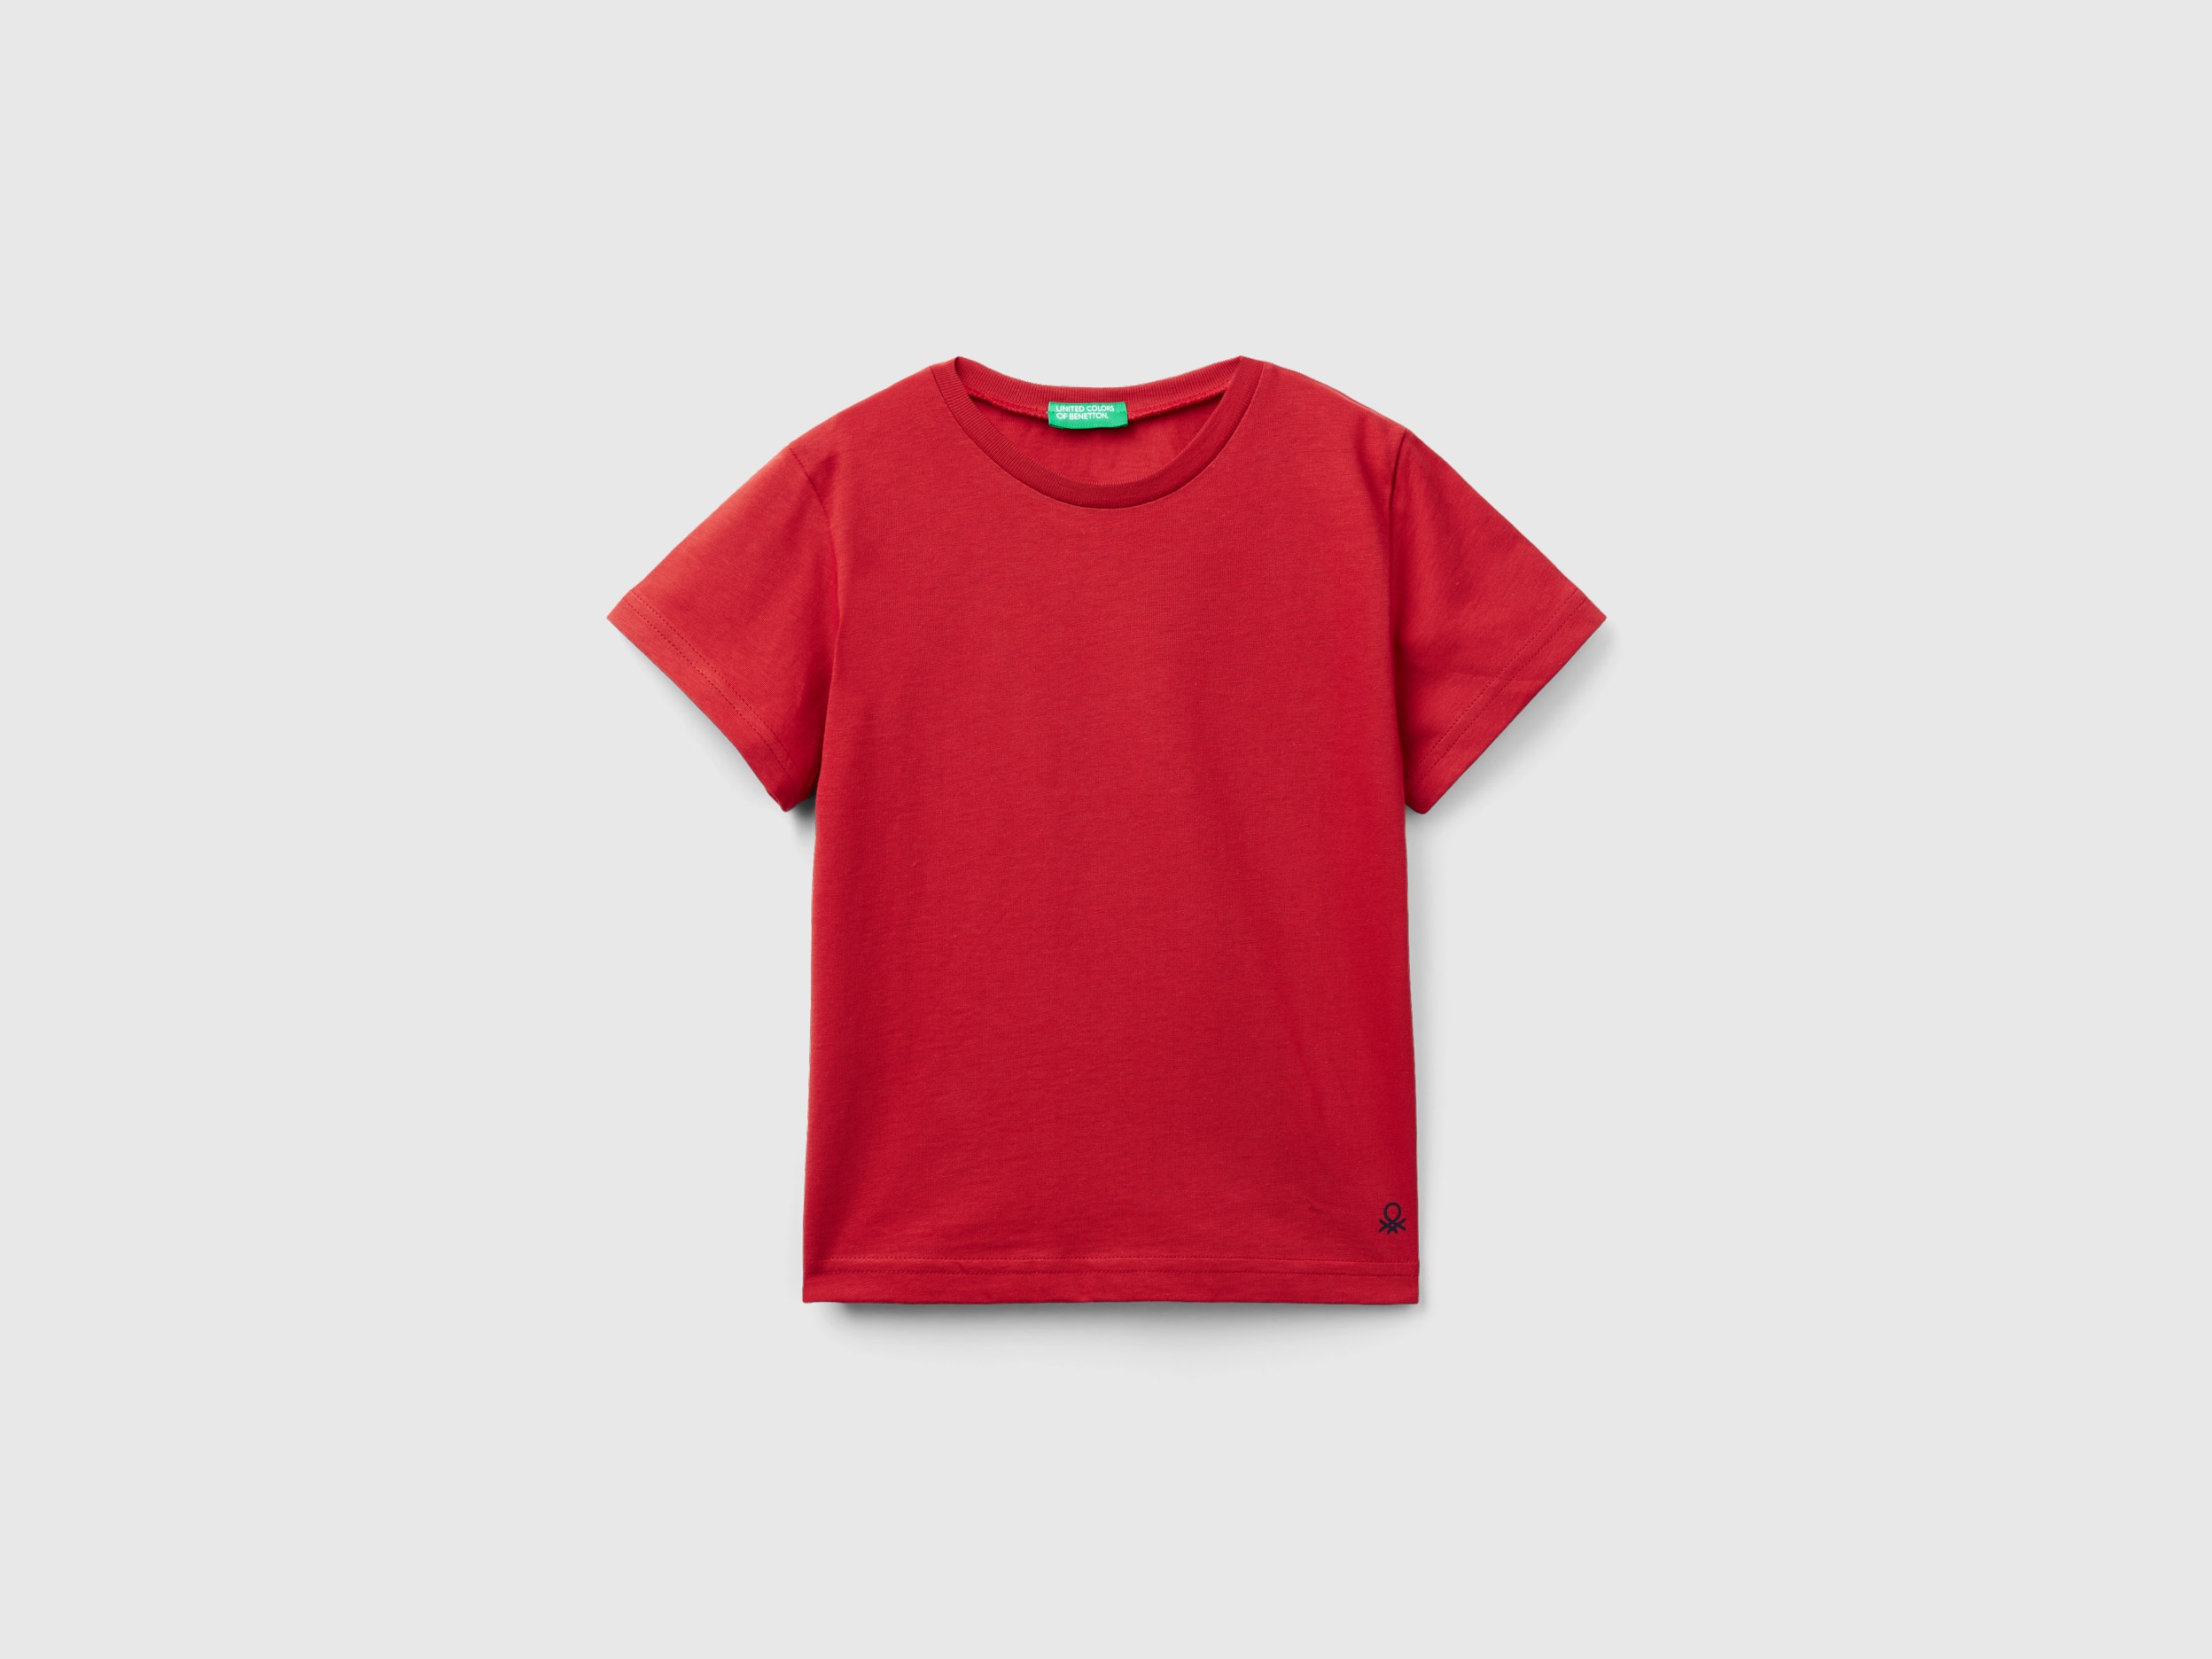 Image of Benetton, T-shirt In Organic Cotton, size 116, Brick Red, Kids